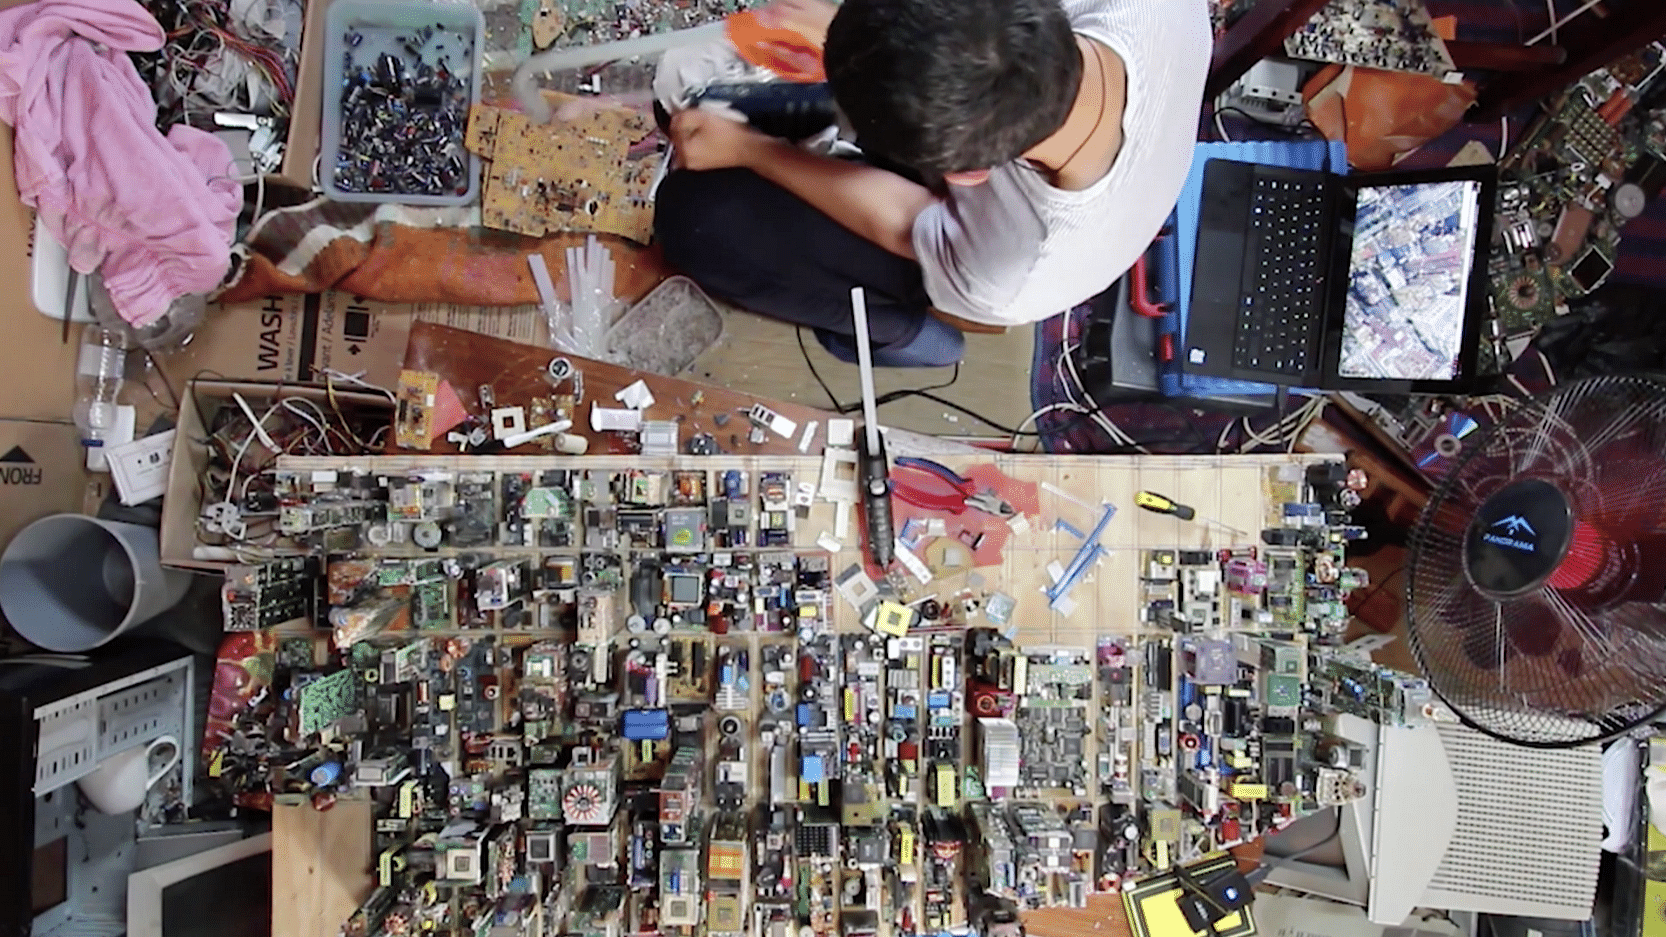 Replica of Midtown Manhattan created in 5 long months using nothing but E-waste products.&nbsp;